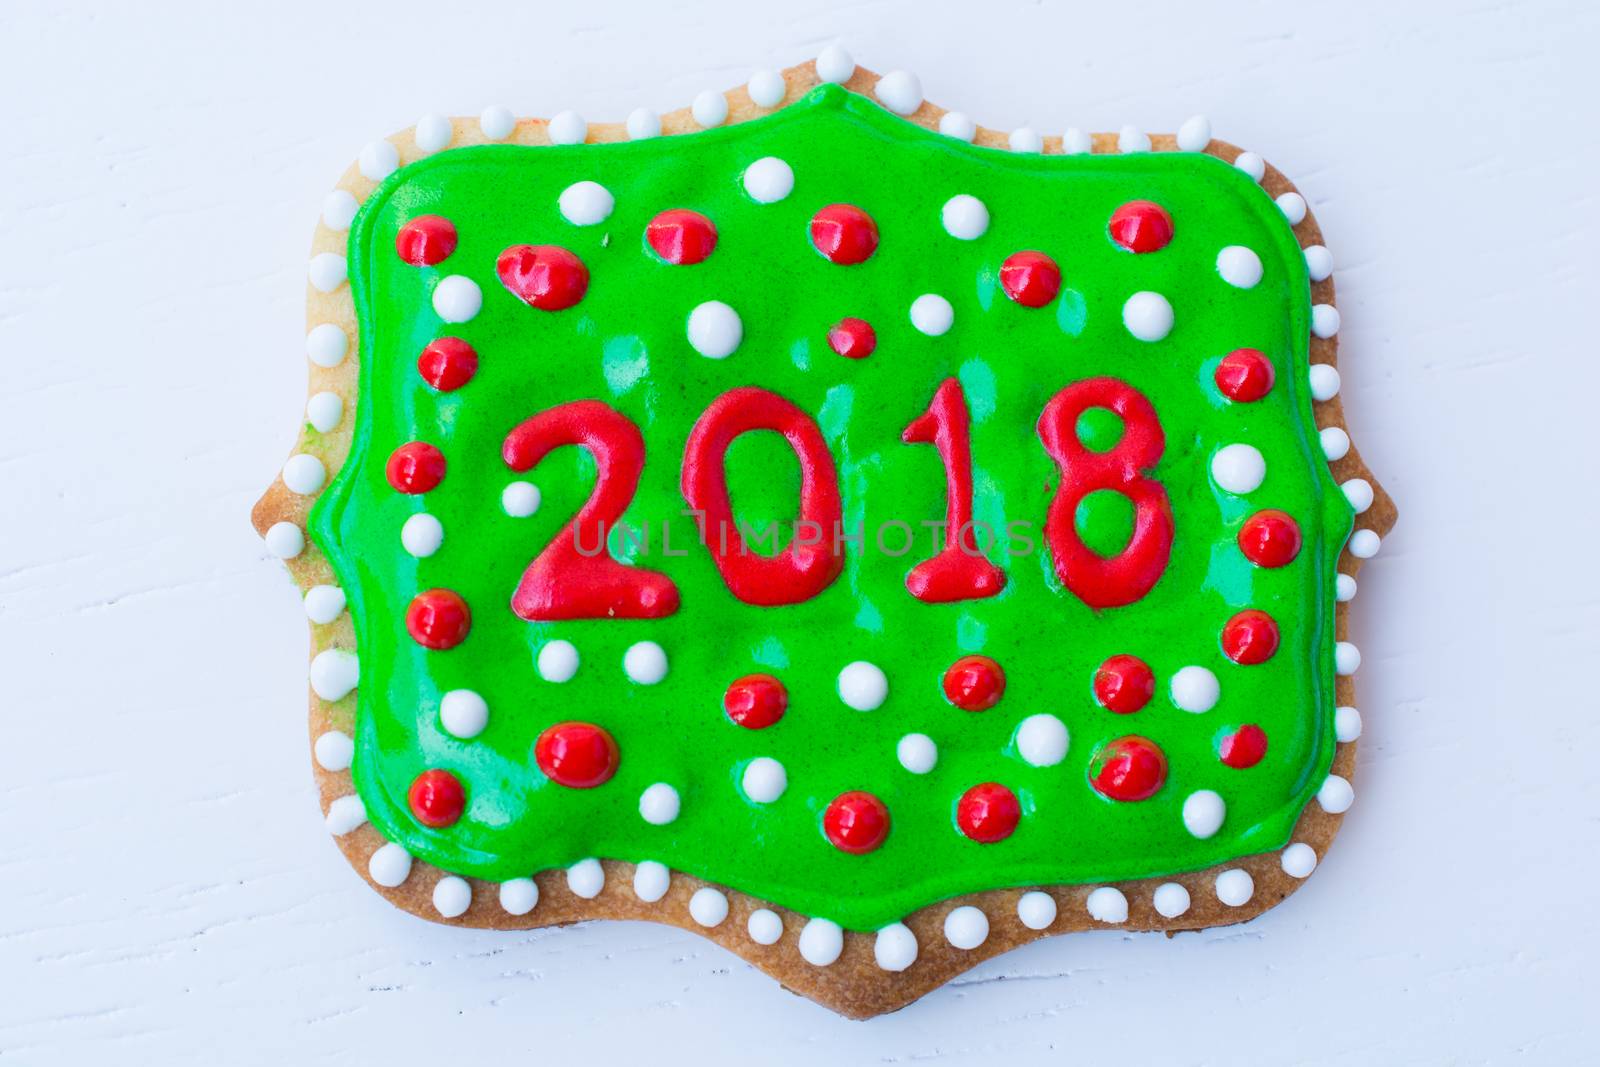 colorful christmas cookies. for the new year celebration. gingerbread and cinnamon biscuits. Year 2018